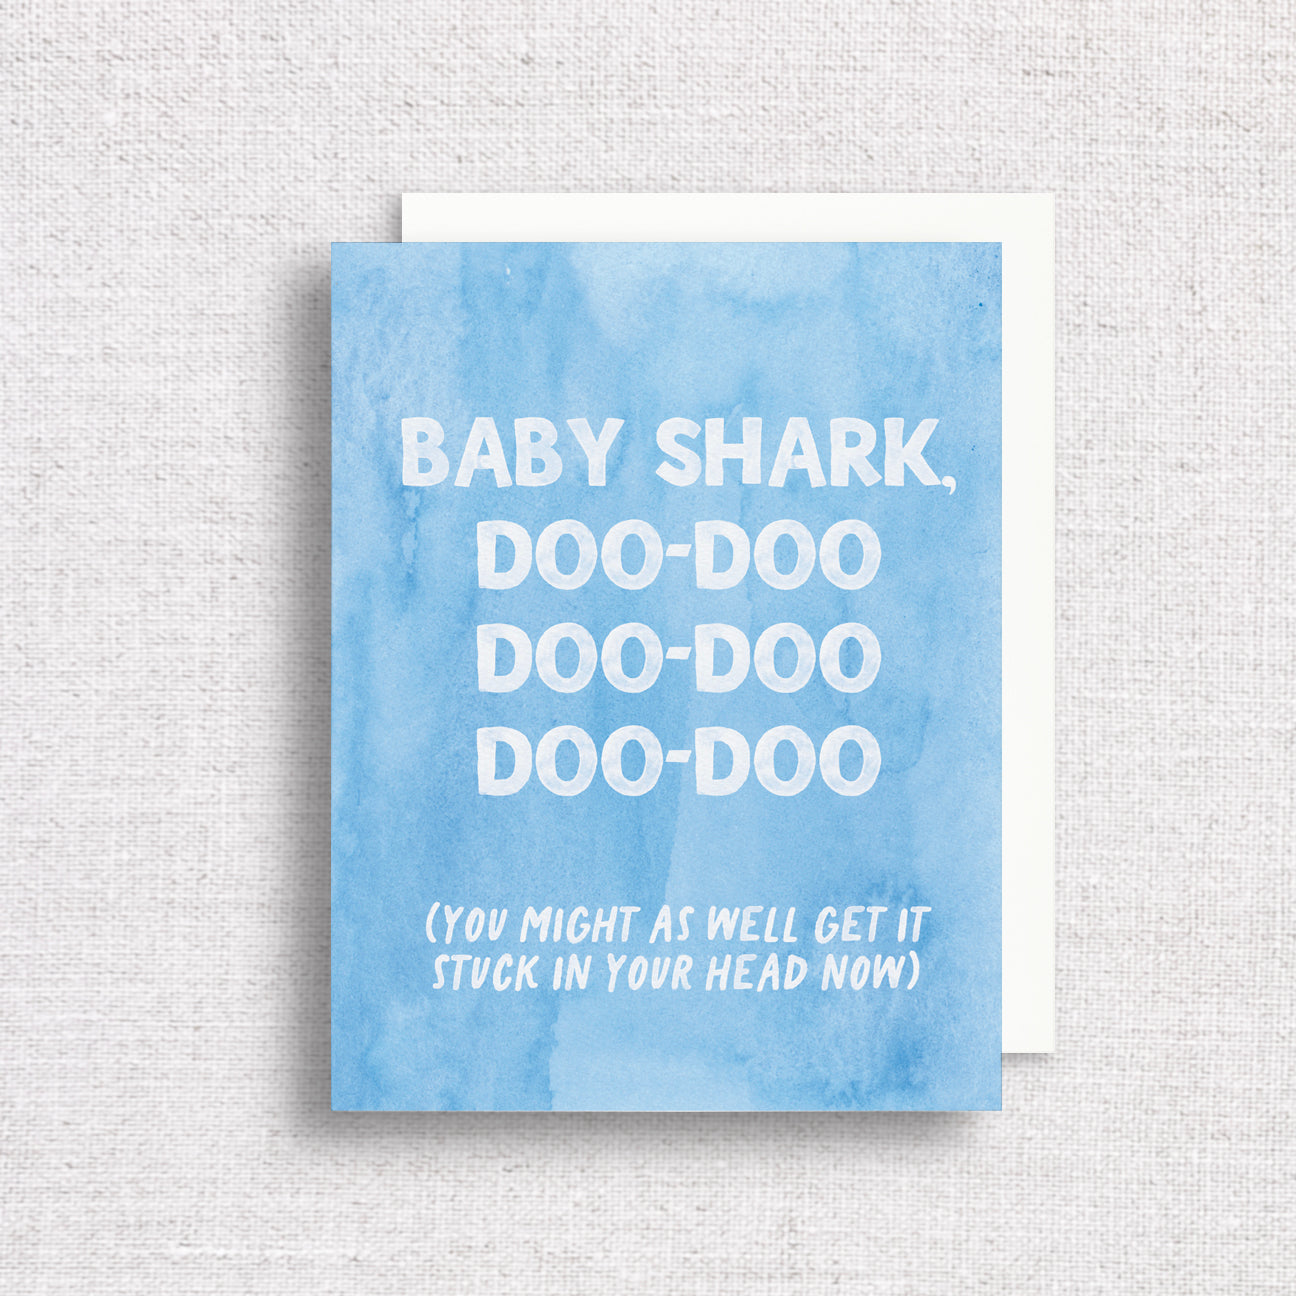 Baby Shark Greeting Card by Gert & Co